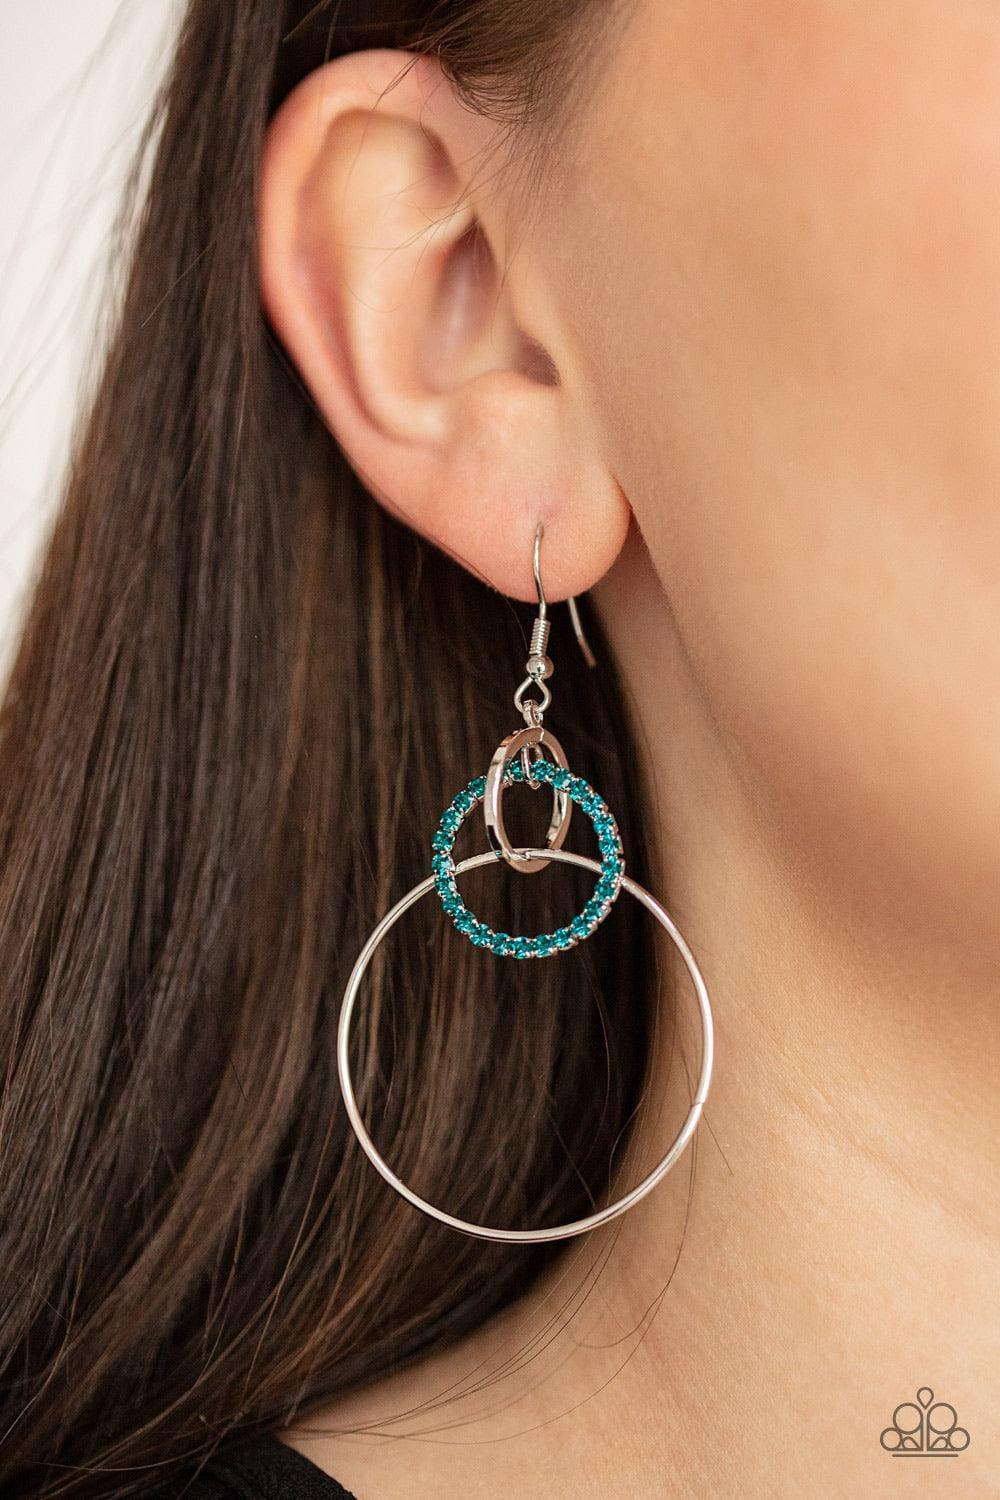 Paparazzi Accessories - In An Orderly Fashion - Blue Earring - Bling by JessieK